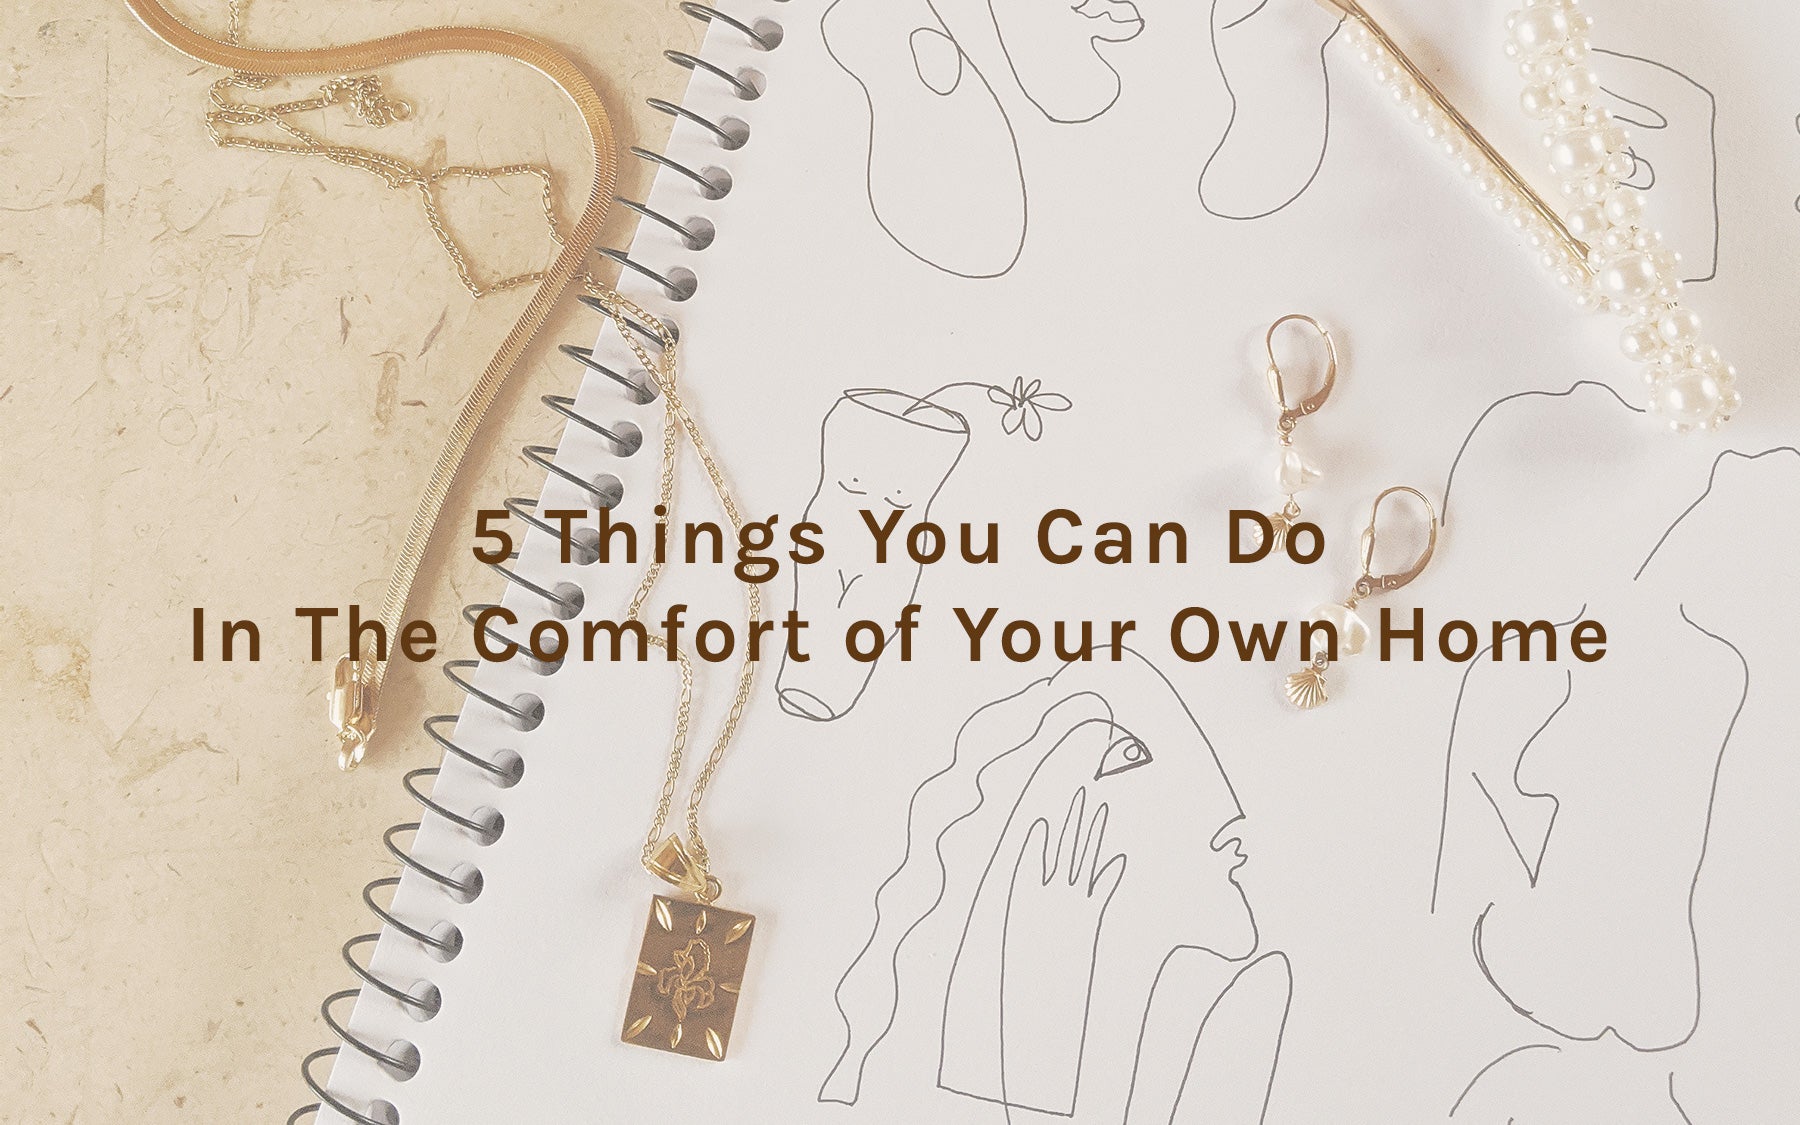 5 Things You Can Do In The Comfort of Your Own Home